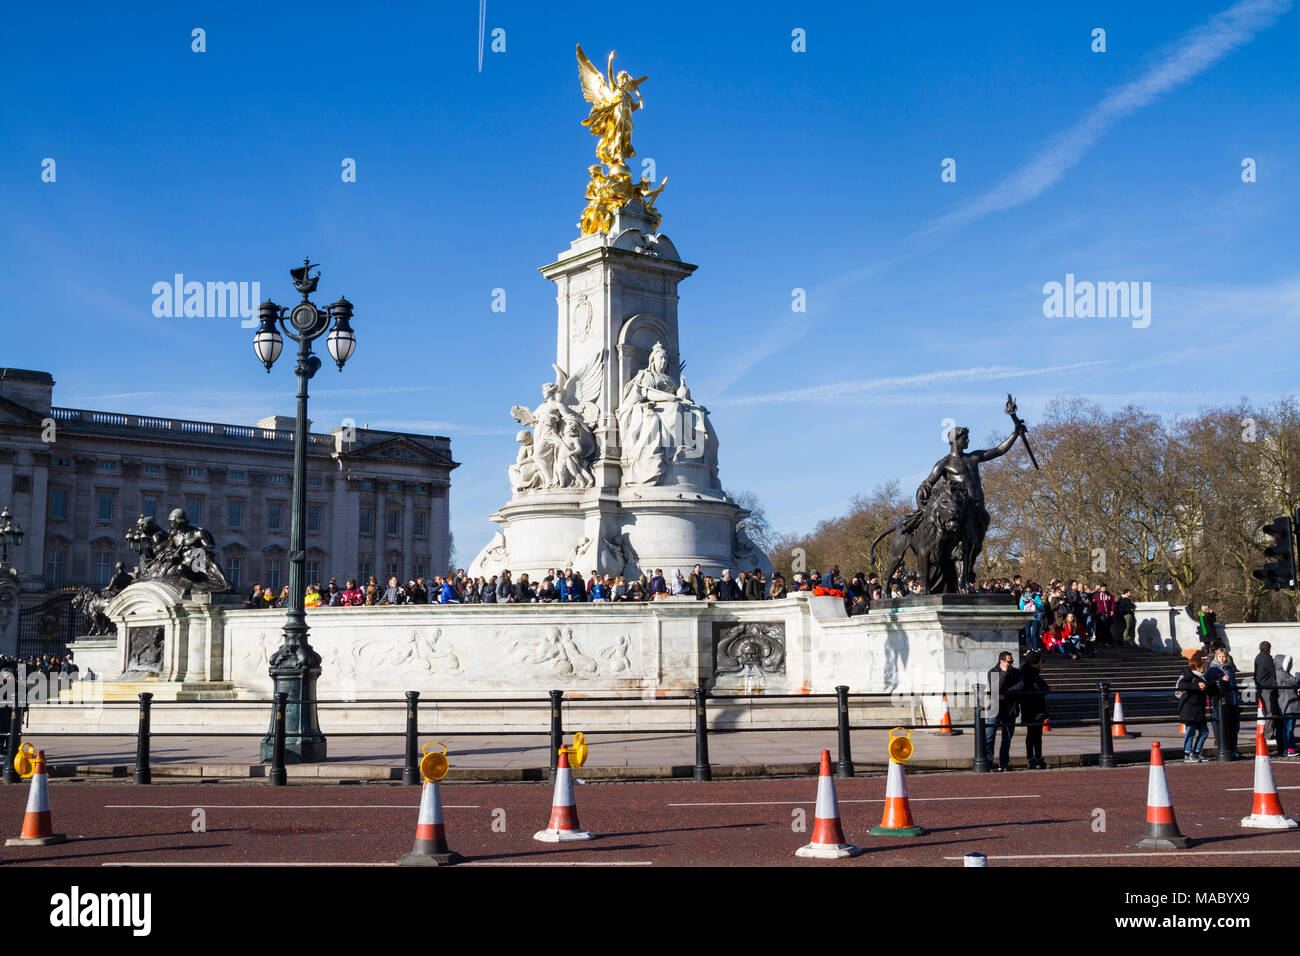 Crowd, tourists gathered at Queen Victoria Monument, Statue outside Buckingham Palace, London UK mall statue british concept mall britain Stock Photo